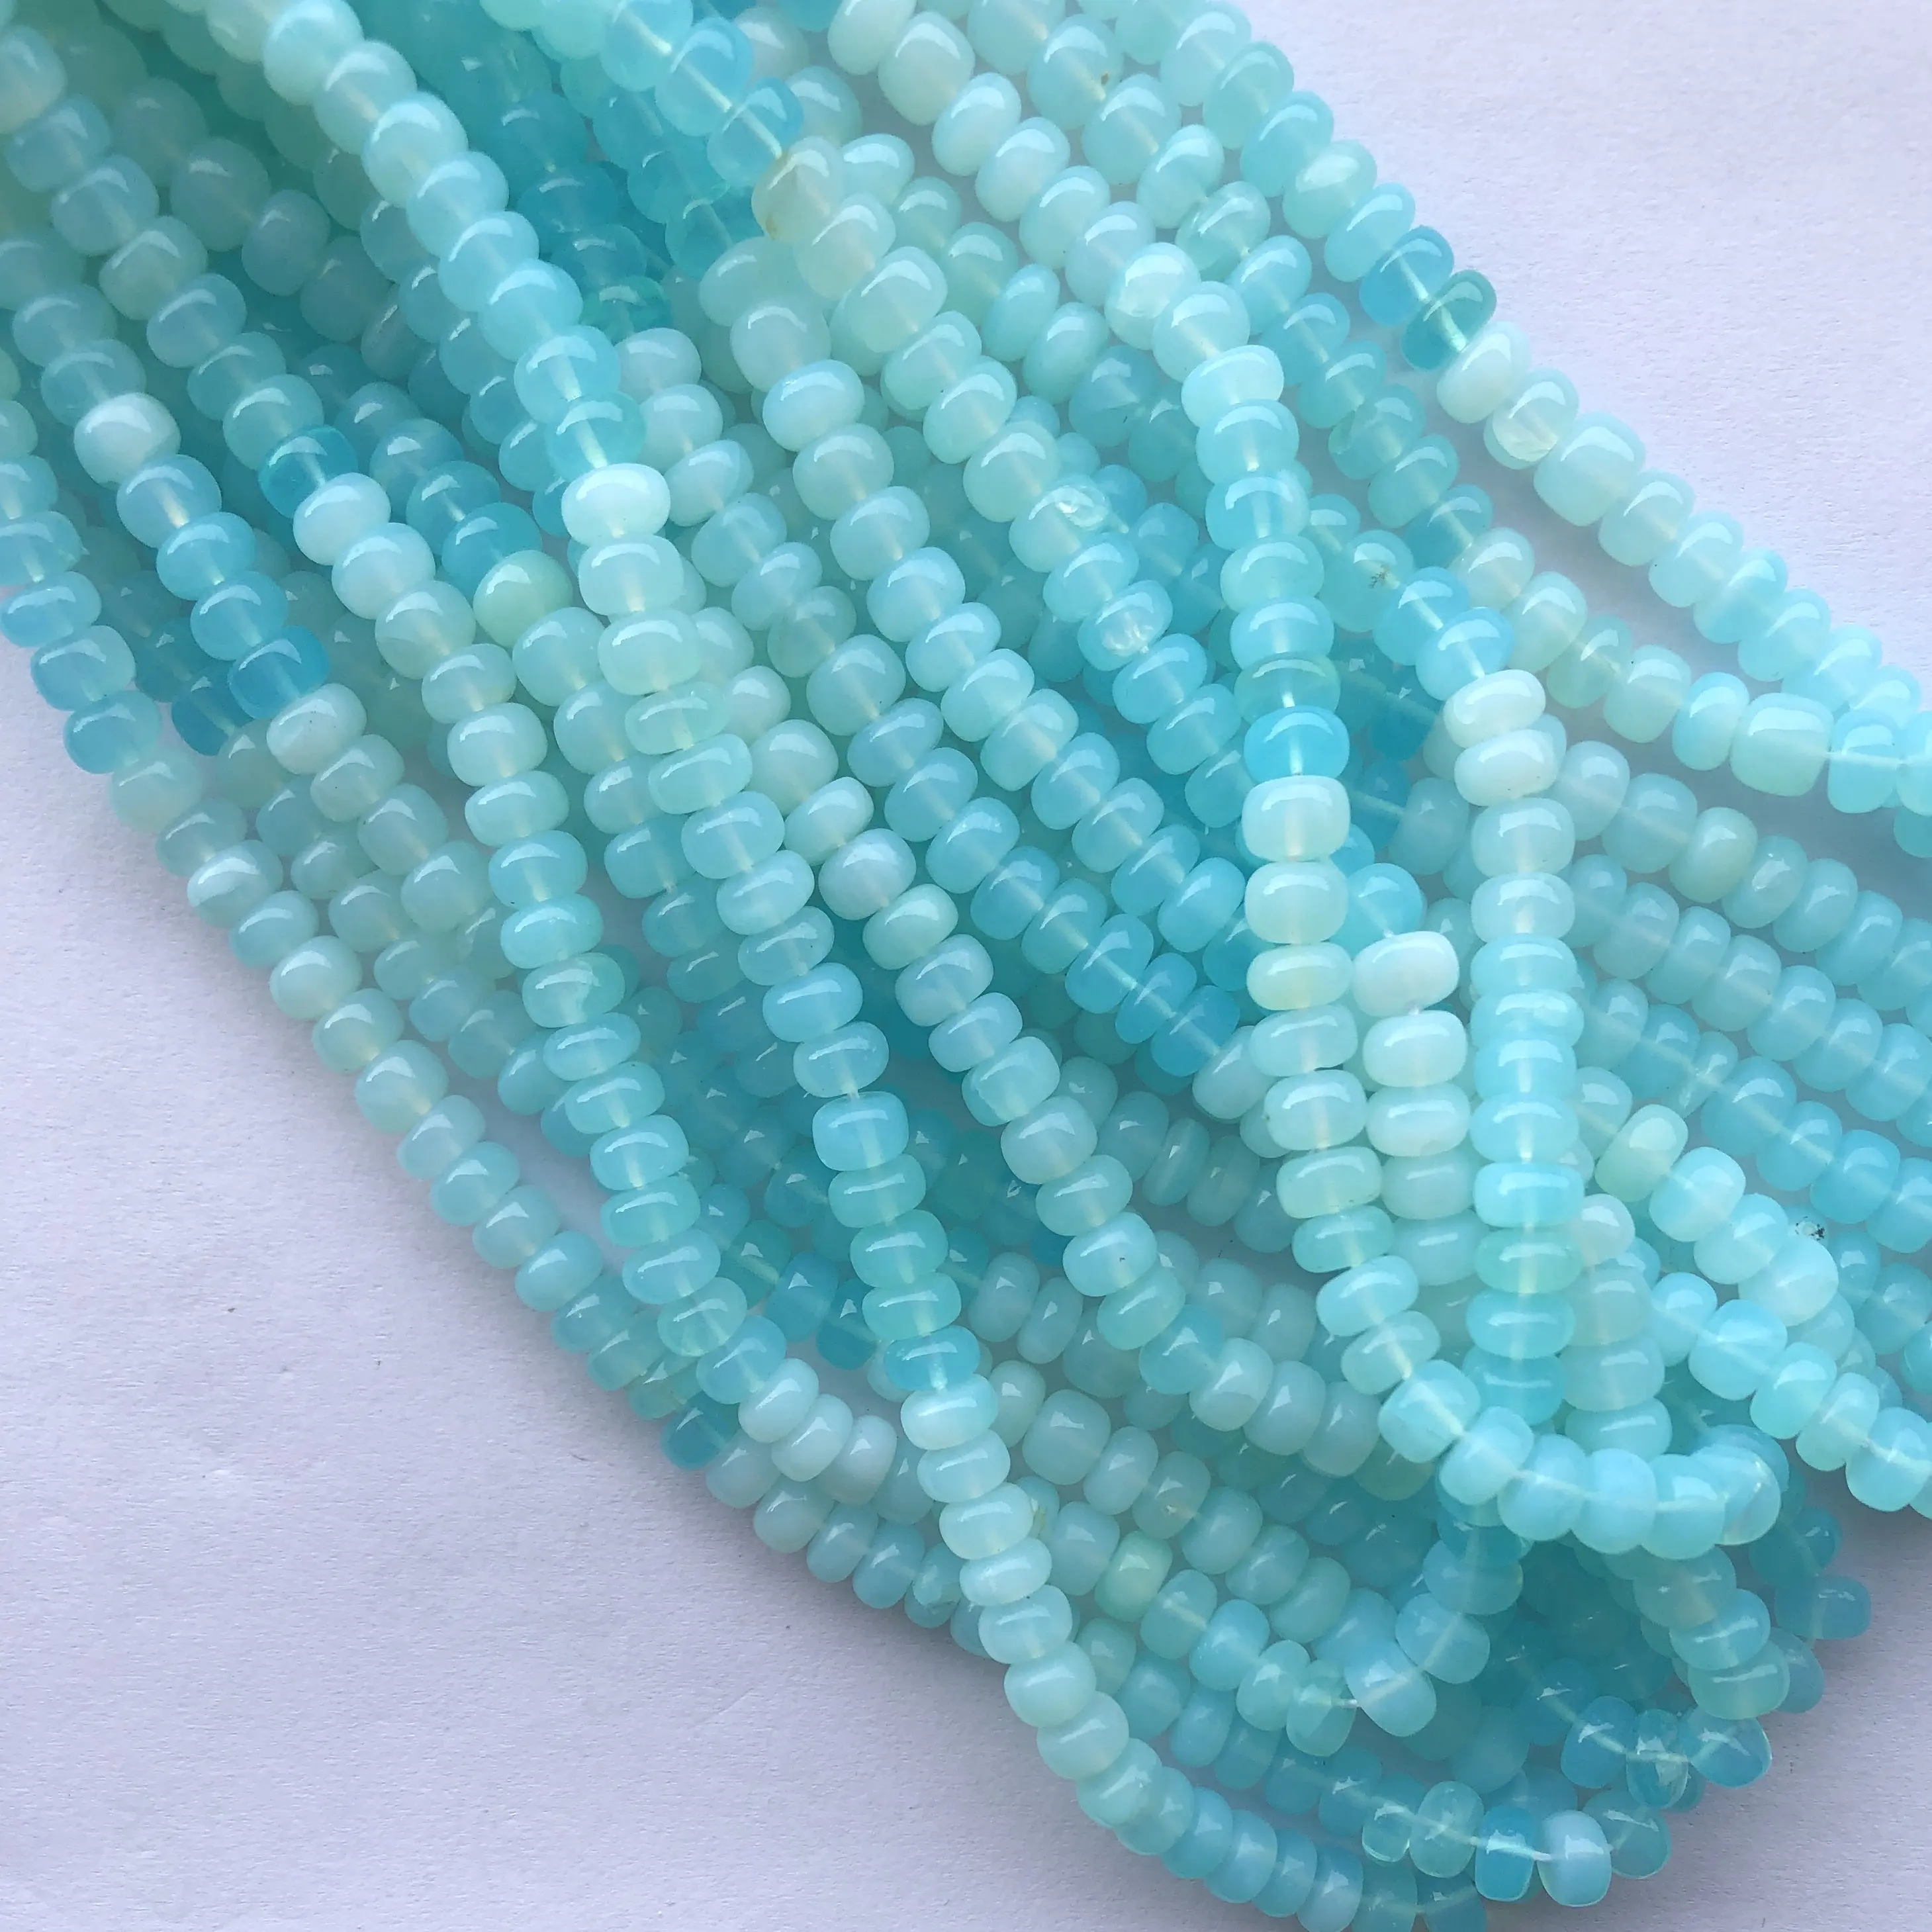 Natural Sea Blue Opal Shaded Stone Smooth Rondelle Beads StrandでWholesale Factory Price Gemstone Buy Direct Online Now